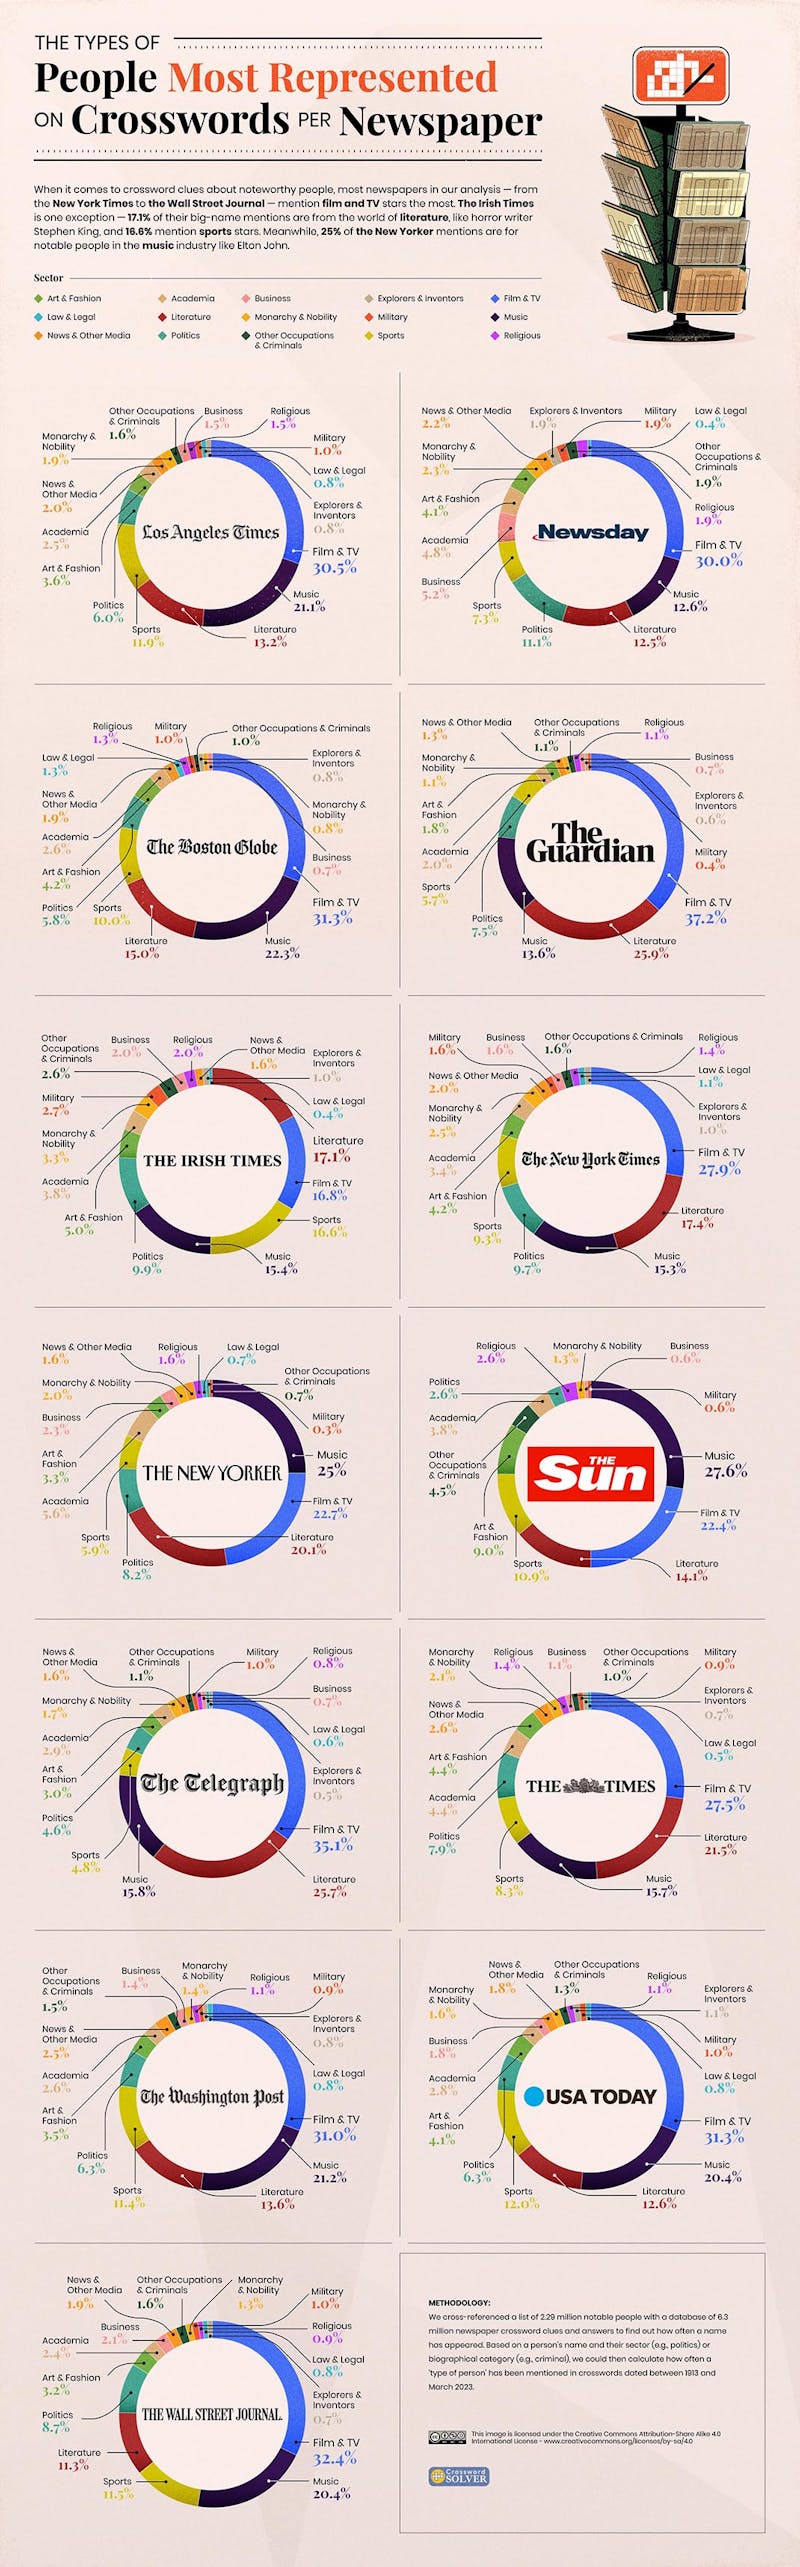 The Types of People Most Represented on Crosswords per Newspaper